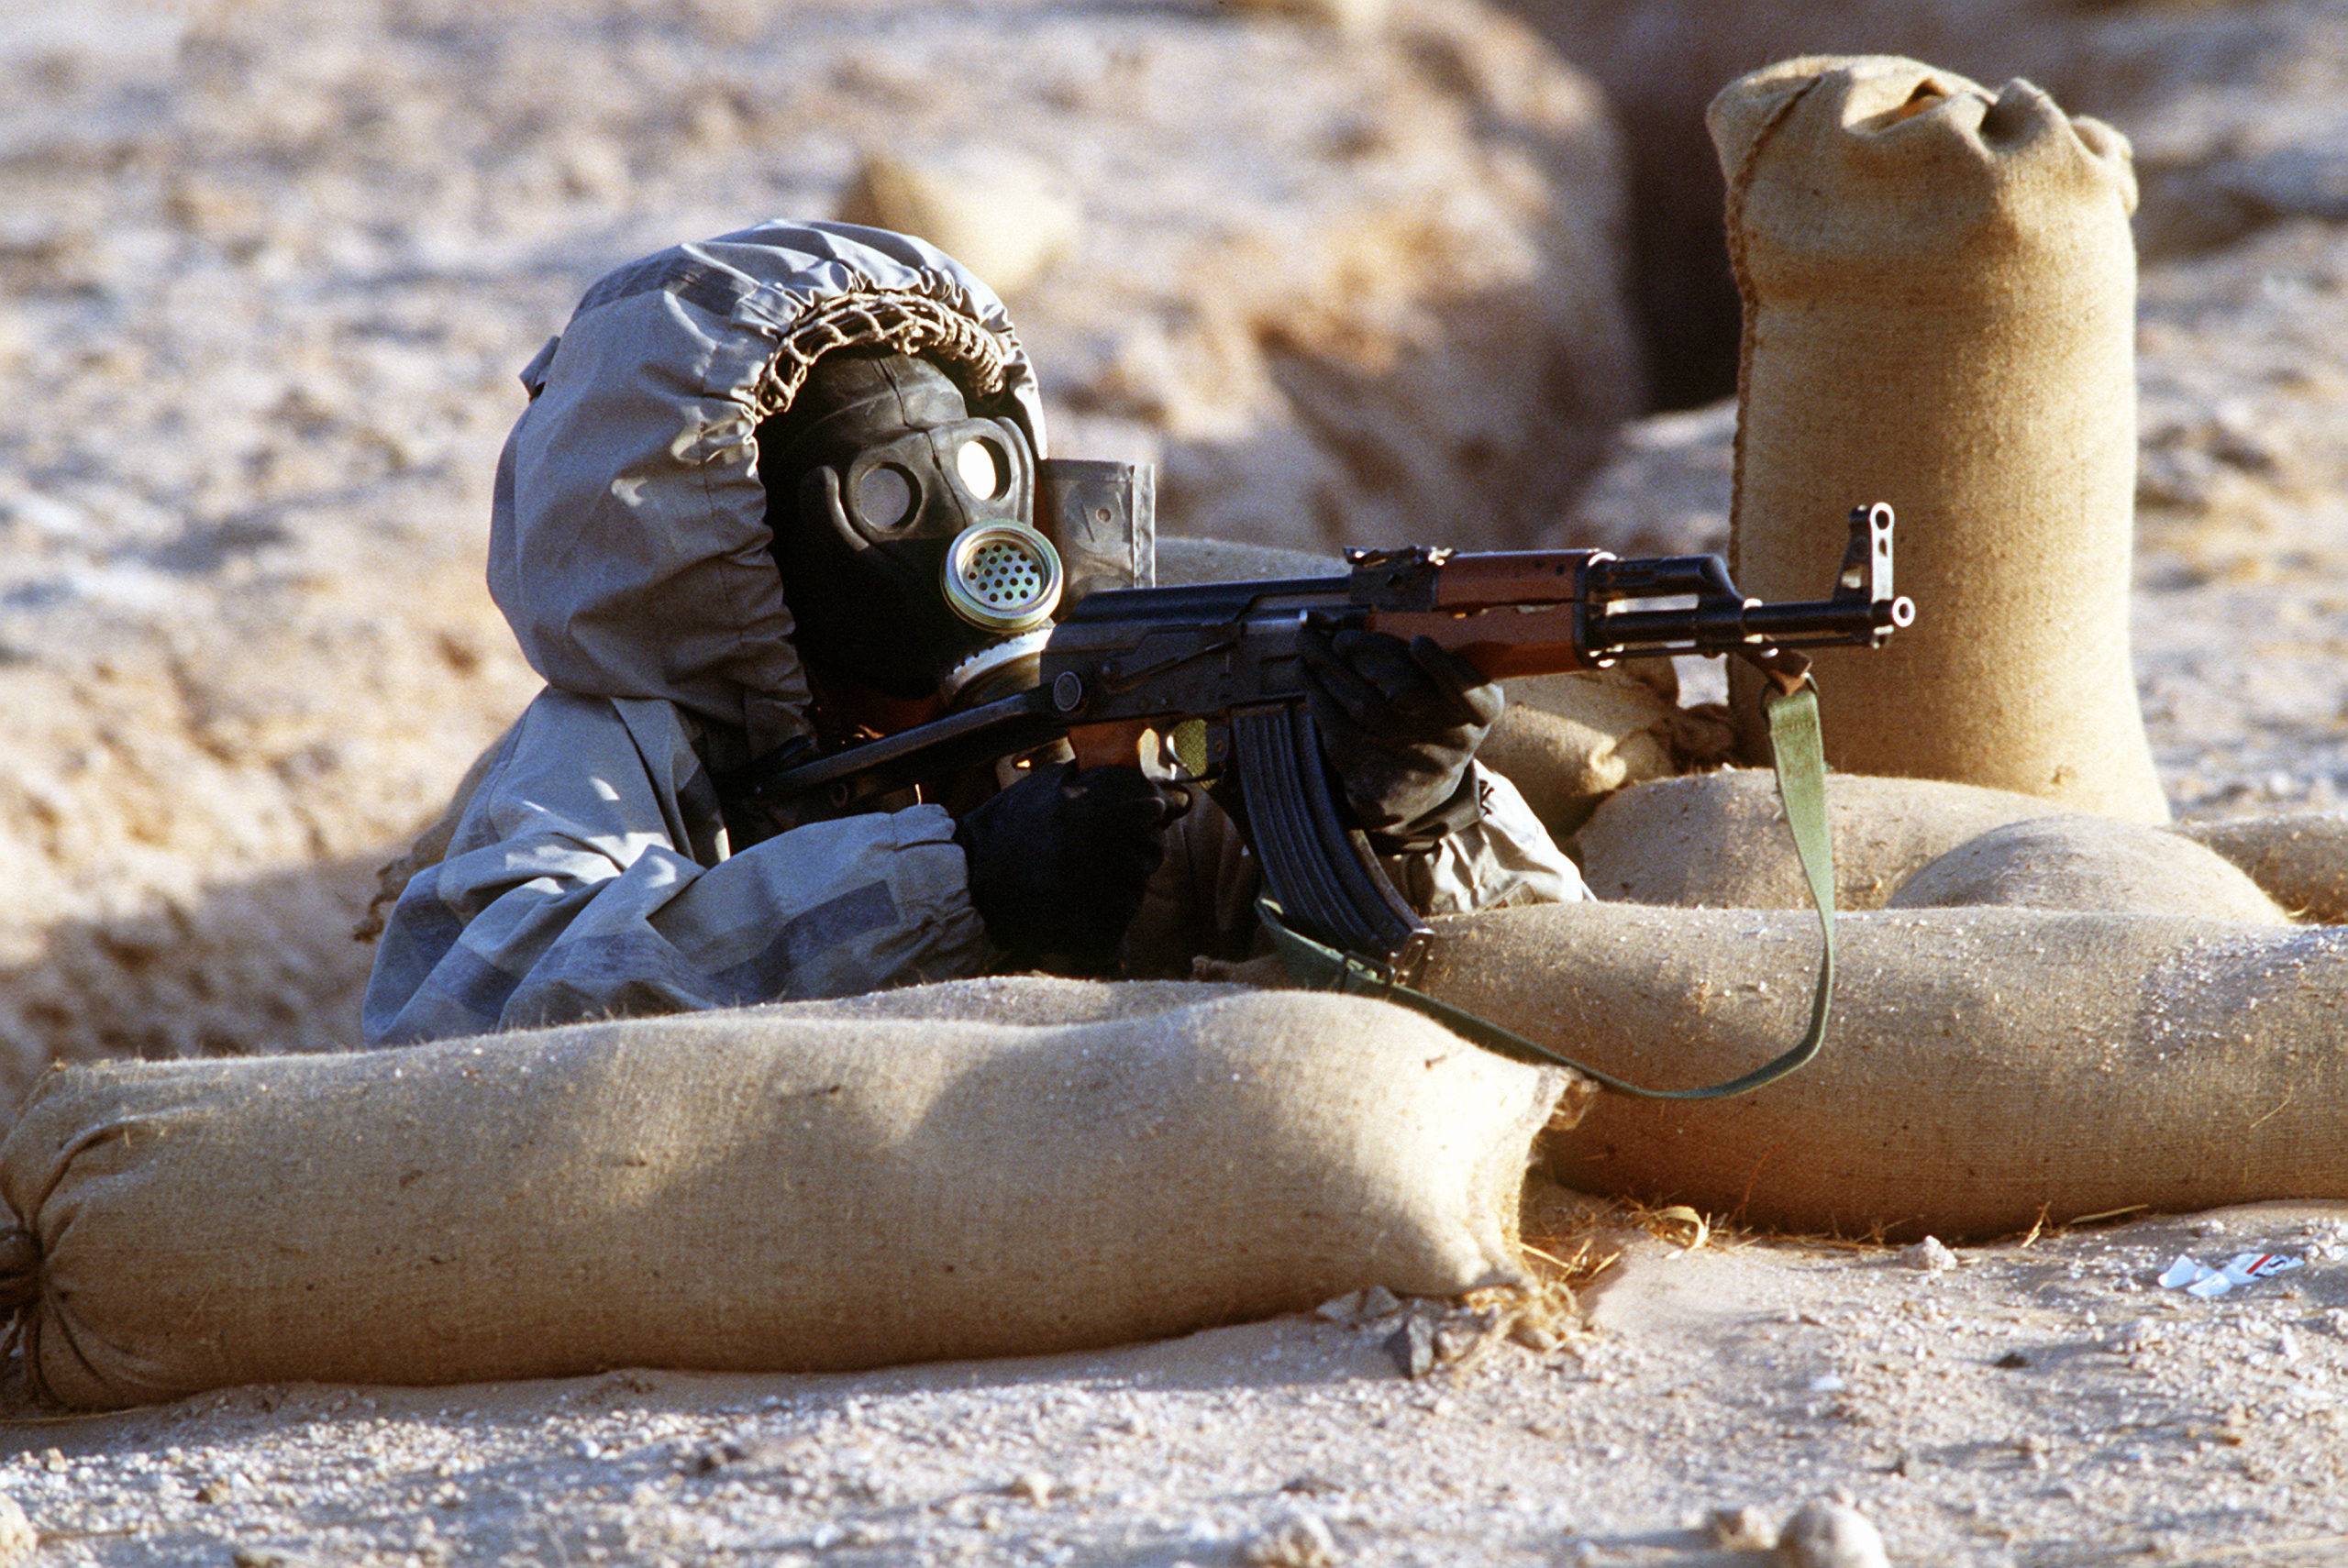 A Syrian soldier aims an AK-47 assault rifle from his position in a foxhole during a firepower demonstration, part of Operation Desert Shield.  The soldier is wearing a Soviet-made Model ShMS nuclear-biological-chemical warfare masks.